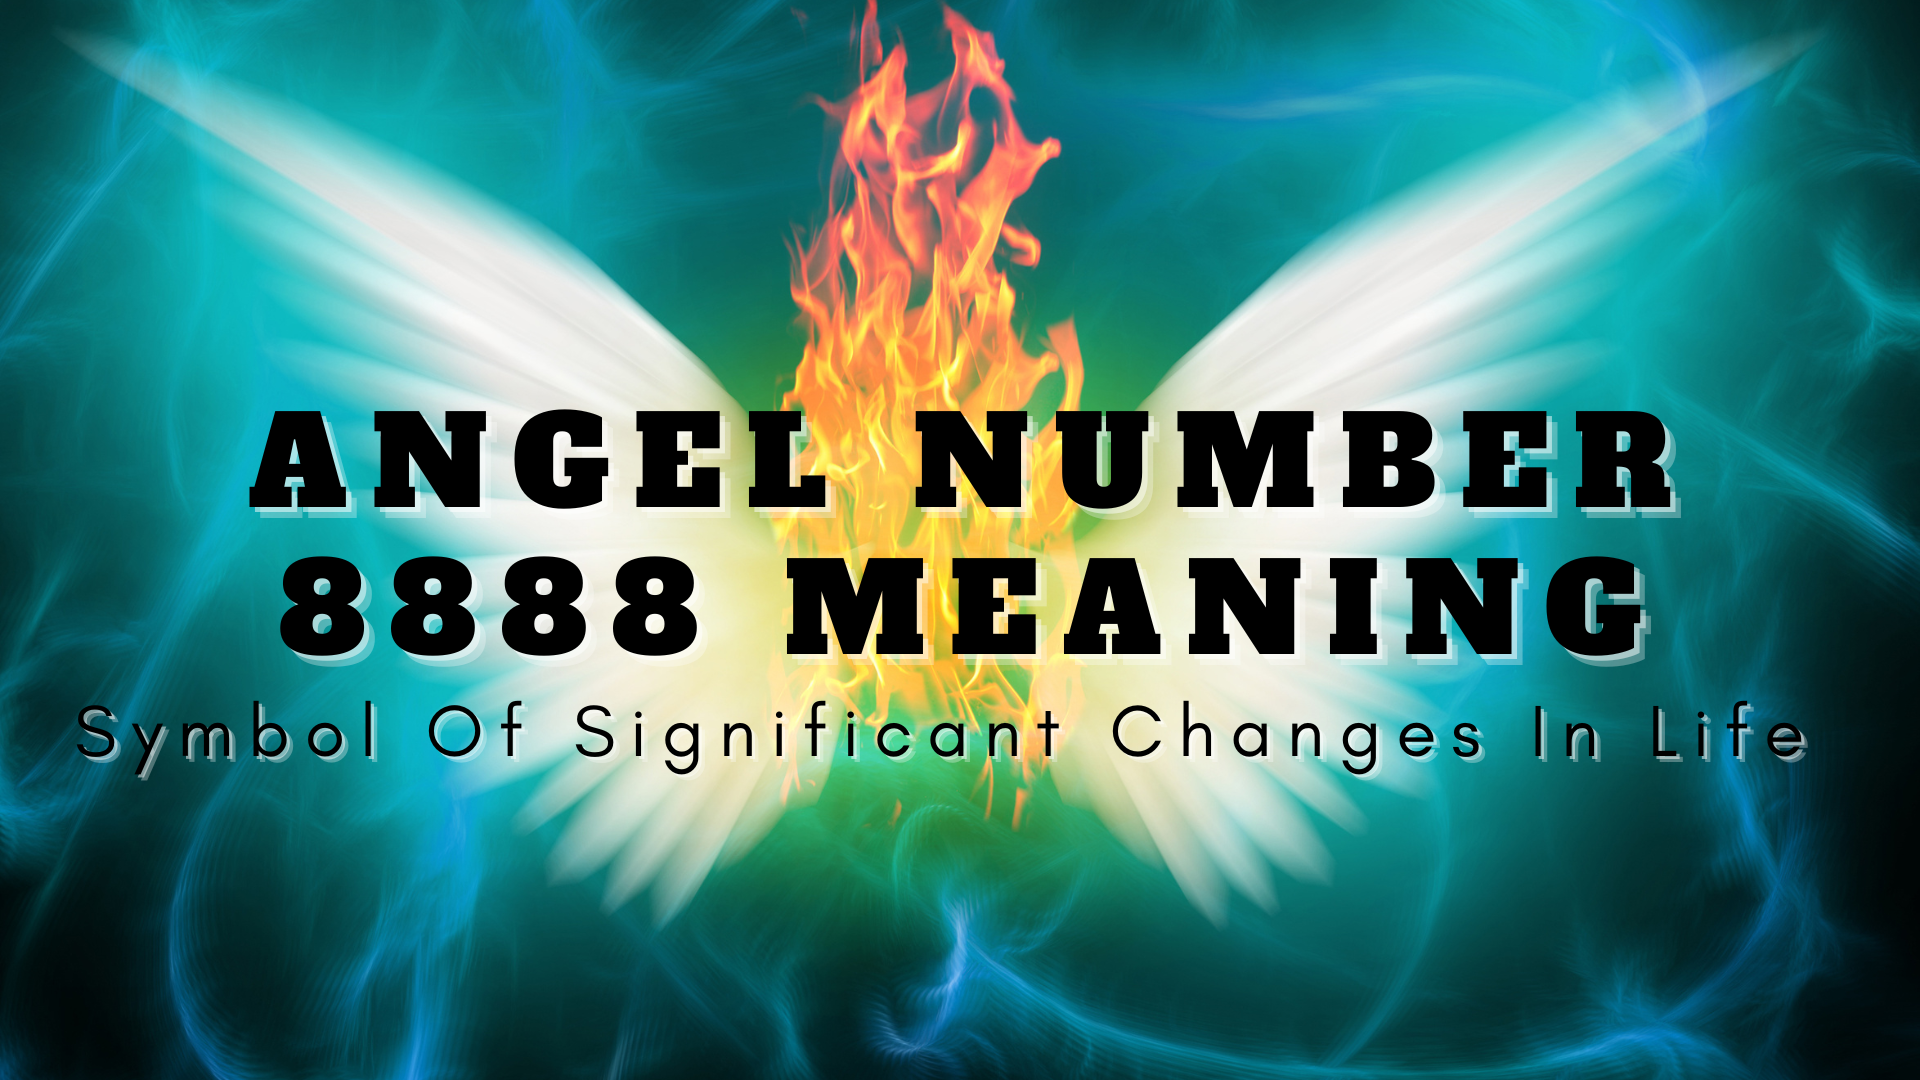 Angel Number 8888 Meaning - Symbol Of Significant Changes In Life